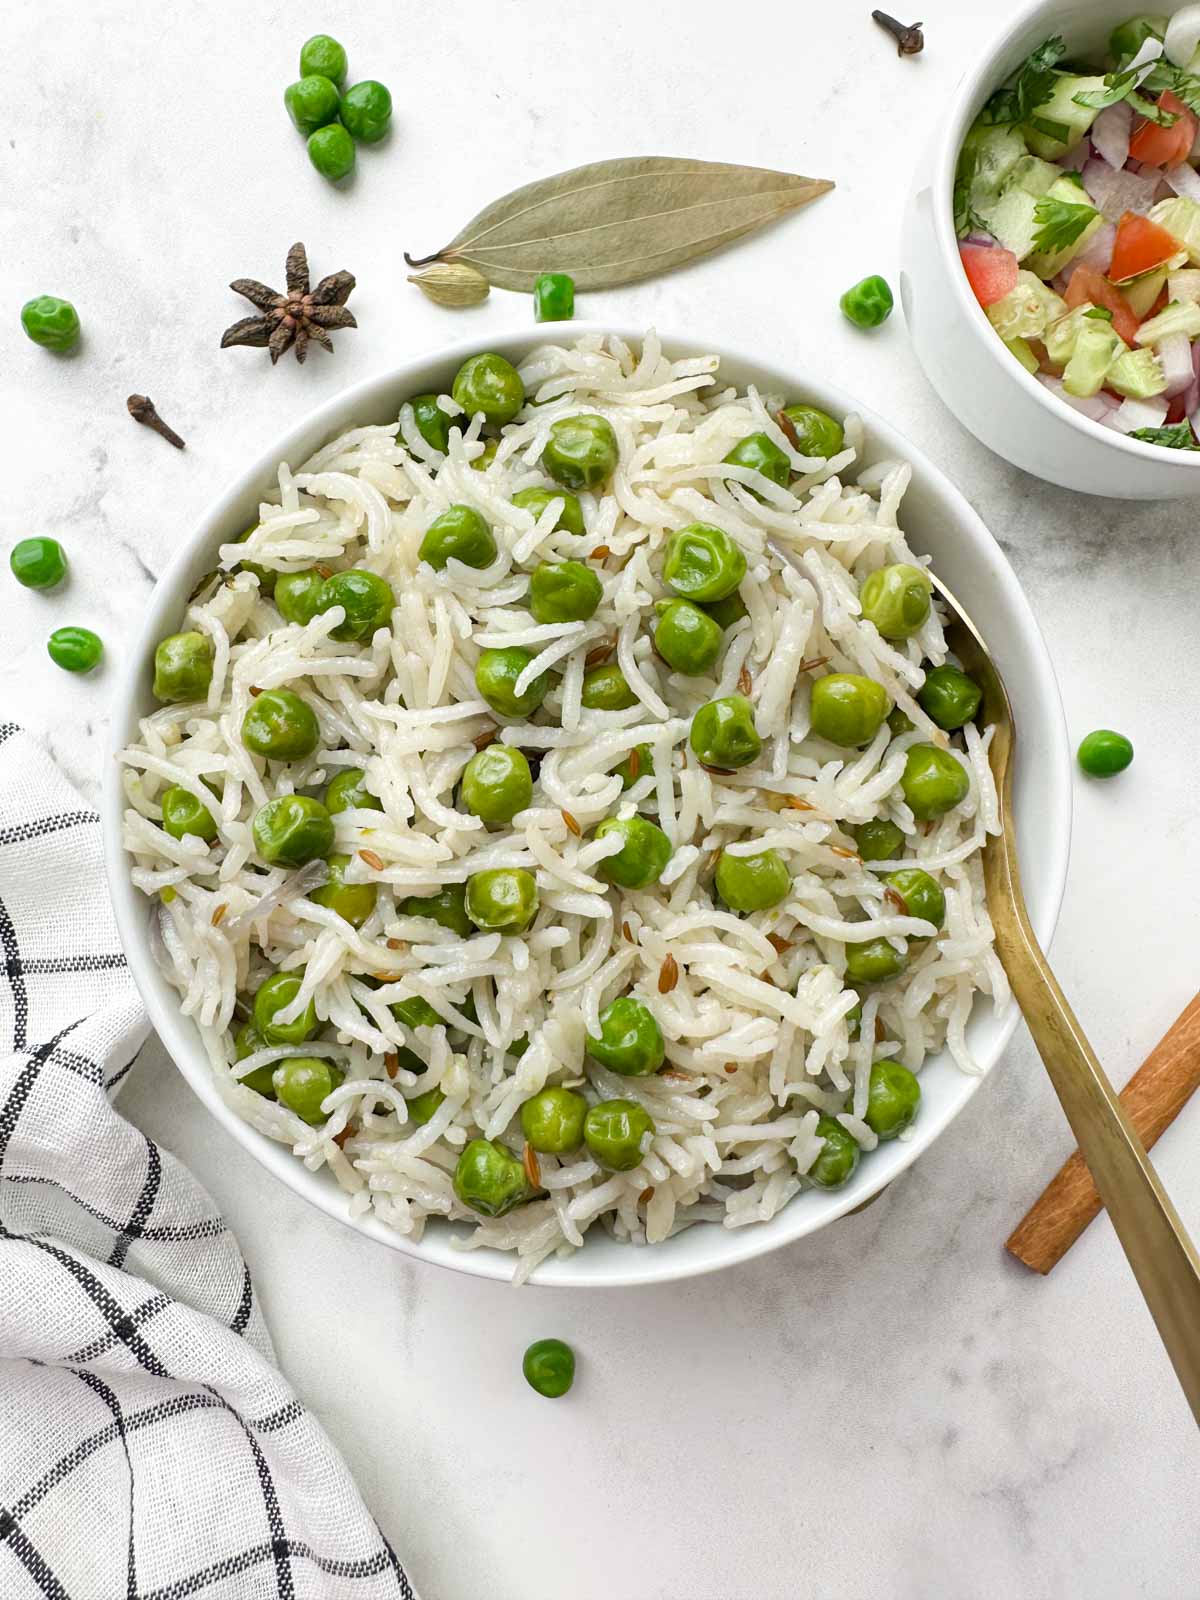 instant pot green peas pulao served in a bowl with salad and spices on the side